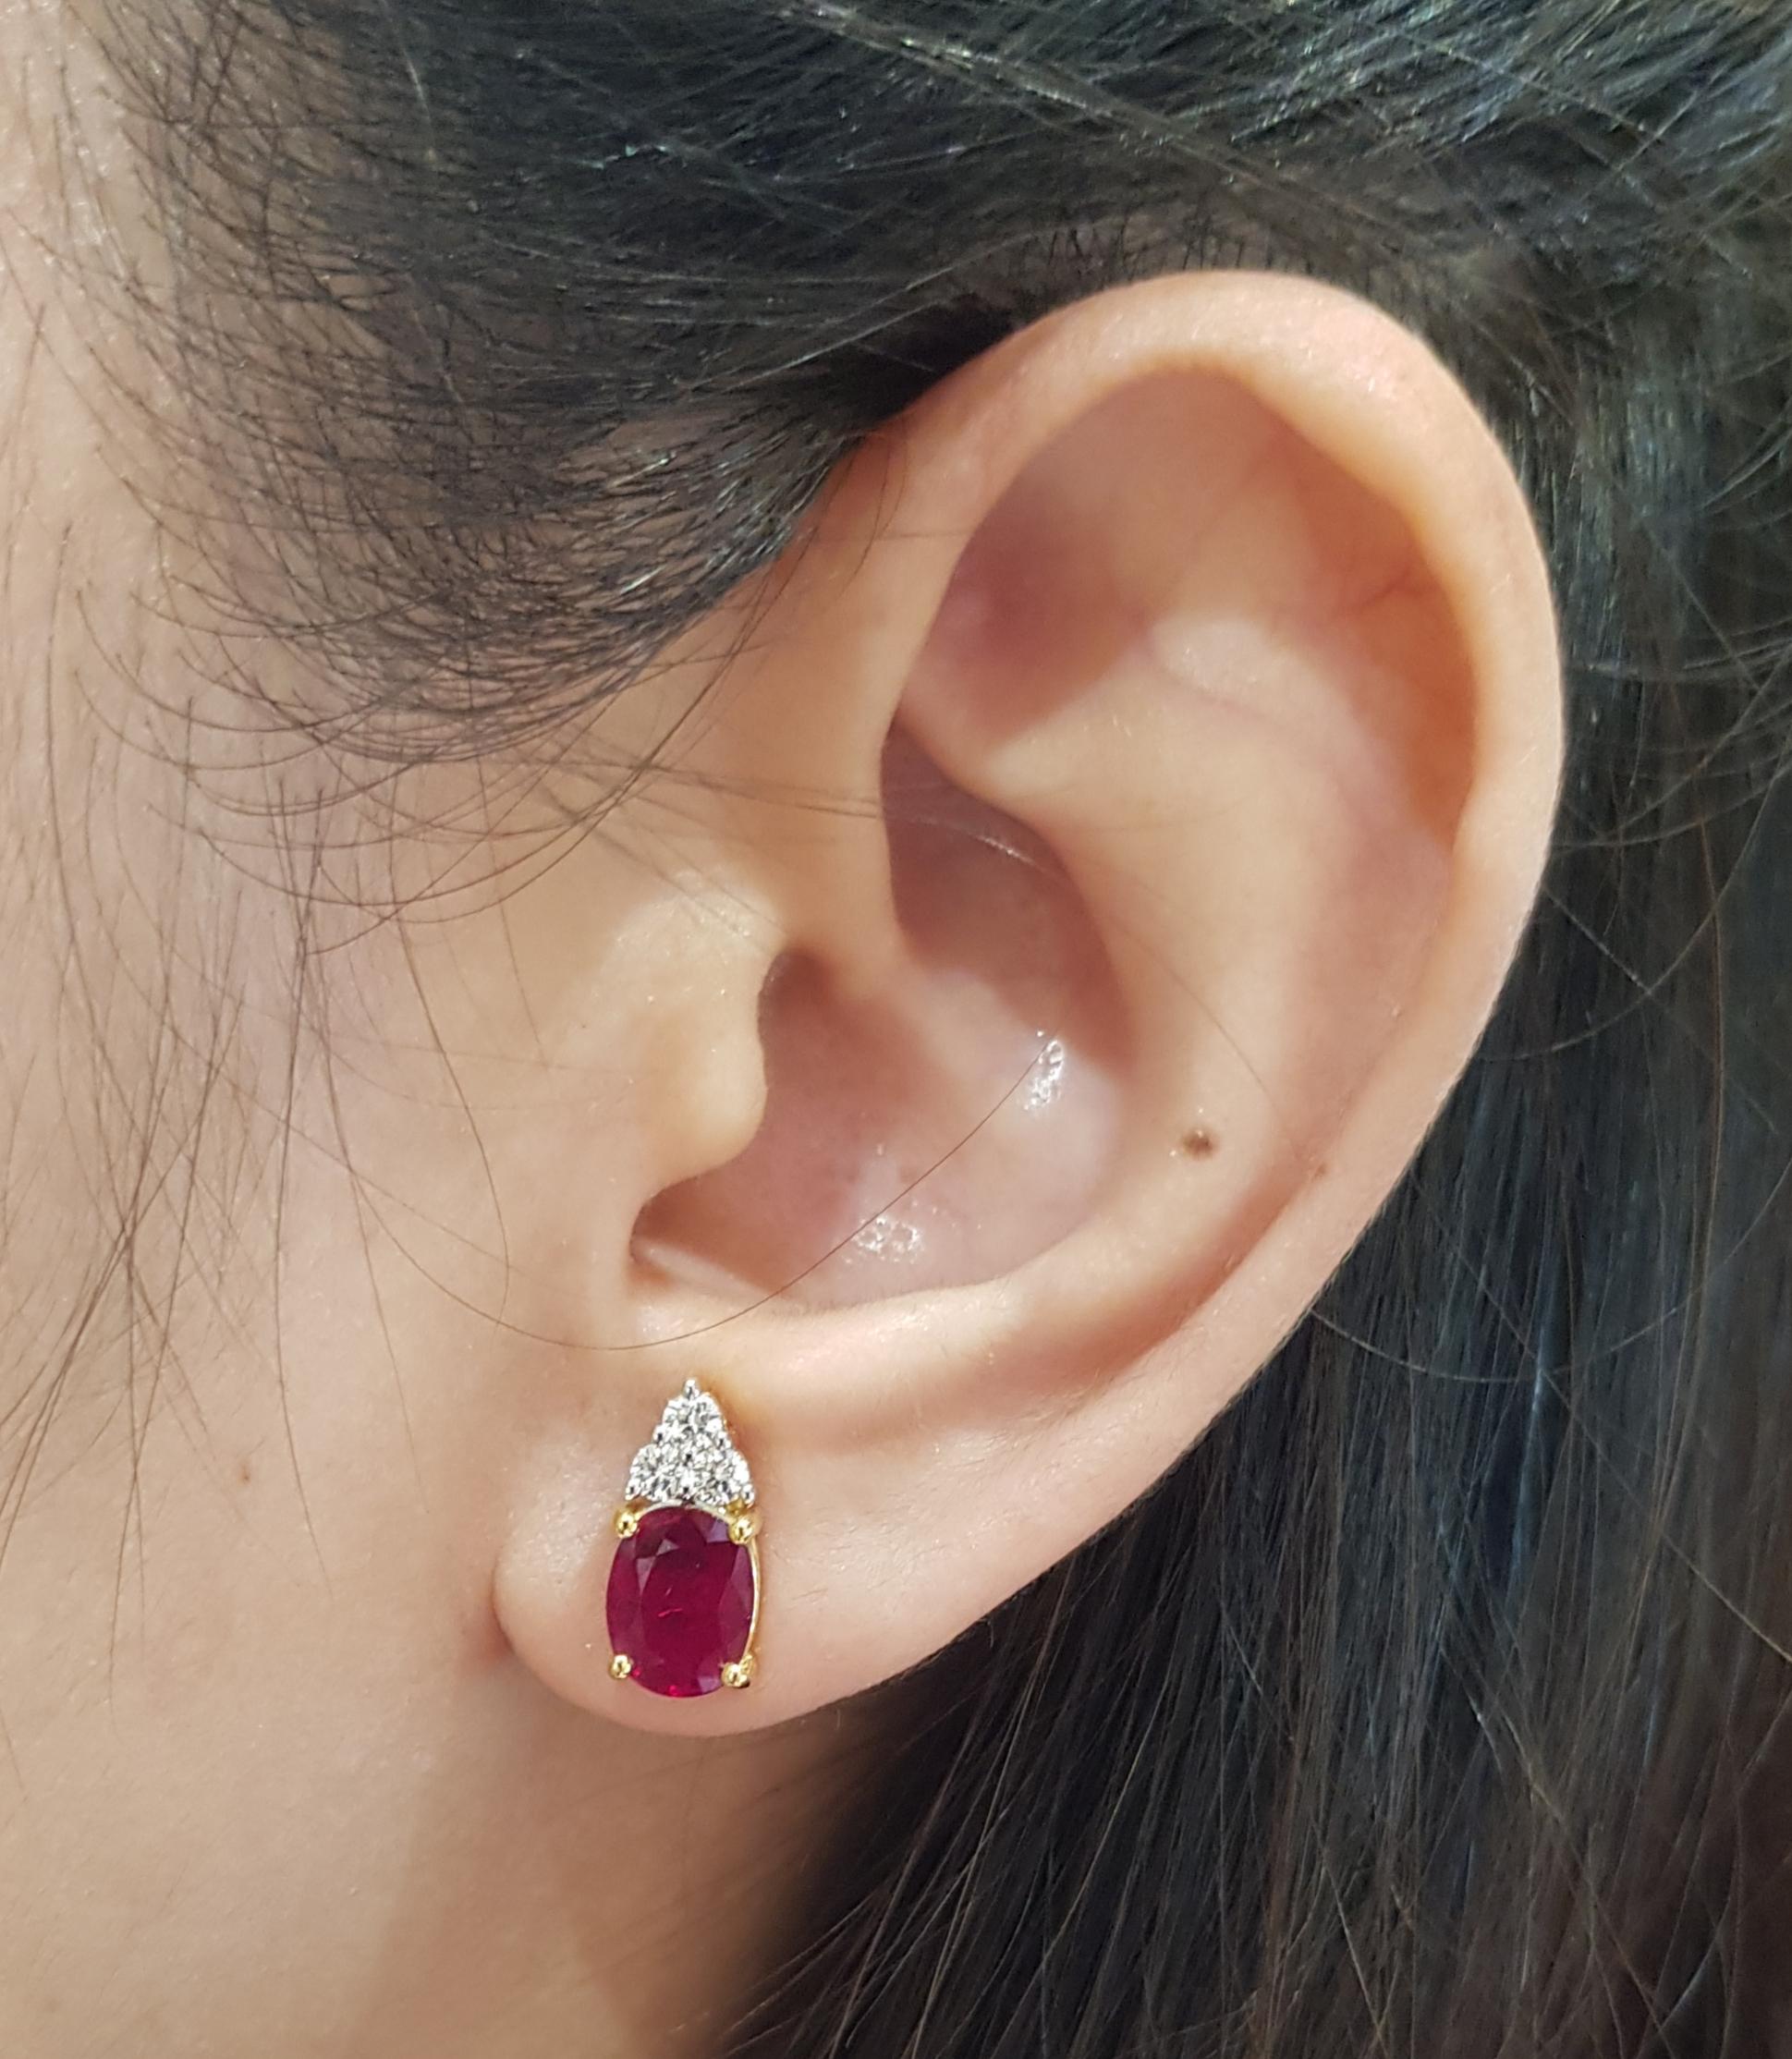 Ruby 1.87 carats with Diamond 0.30 carat Earrings set in 18 Karat Gold Settings

Width:  0.6 cm 
Length:  1.3 cm
Total Weight: 4.03 grams

